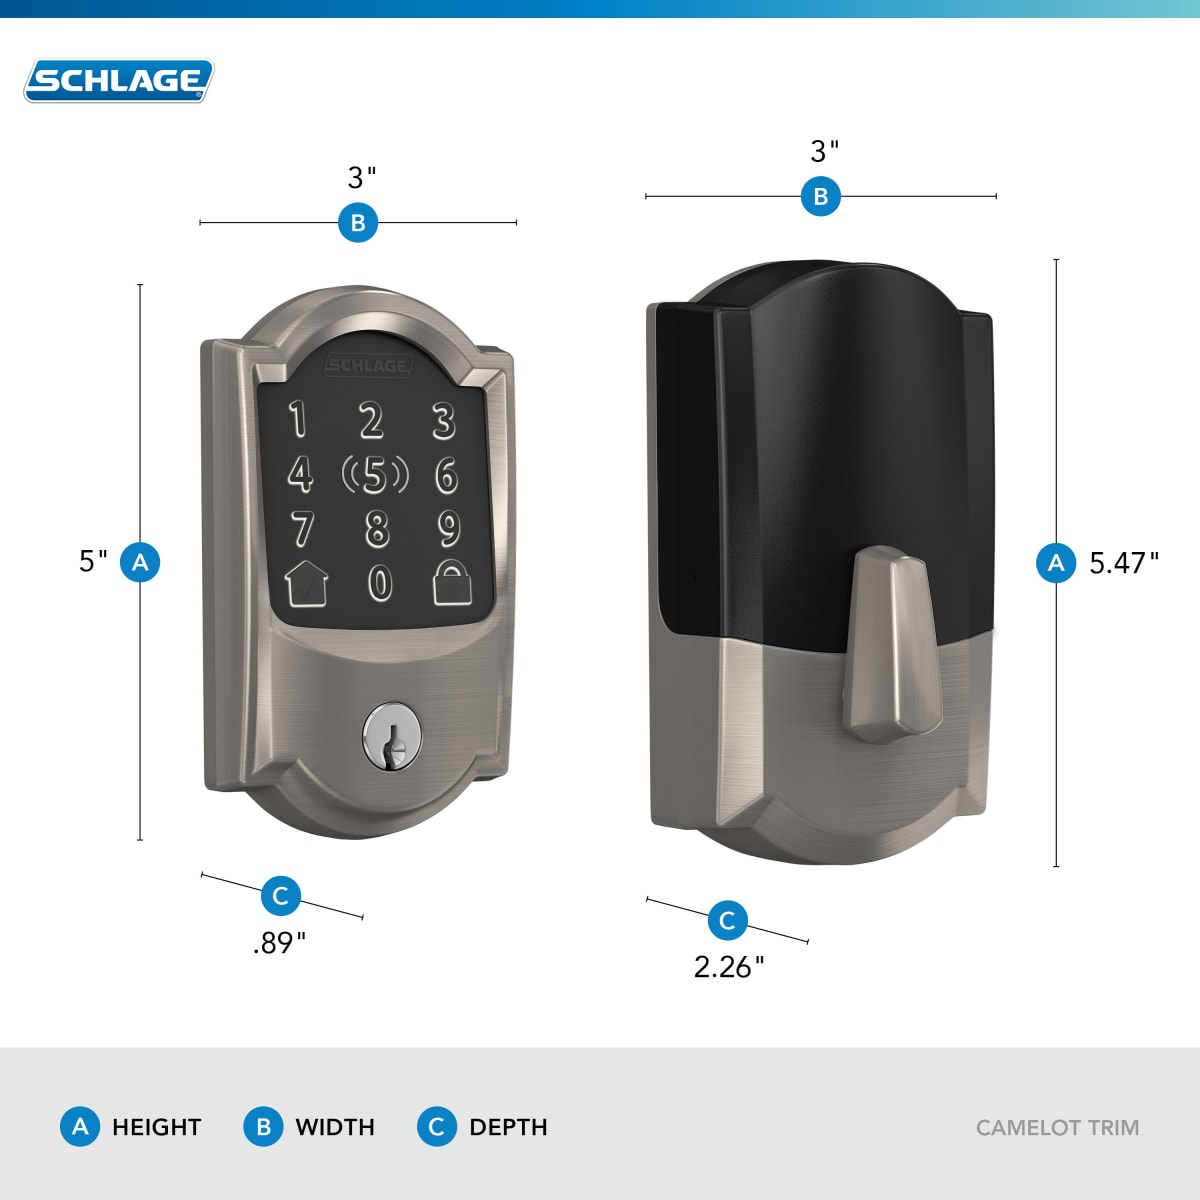 Schlage BE499WBCAM619 Satin Nickel Encode Plus Camelot Touchscreen  Electronic Deadbolt with WiFi